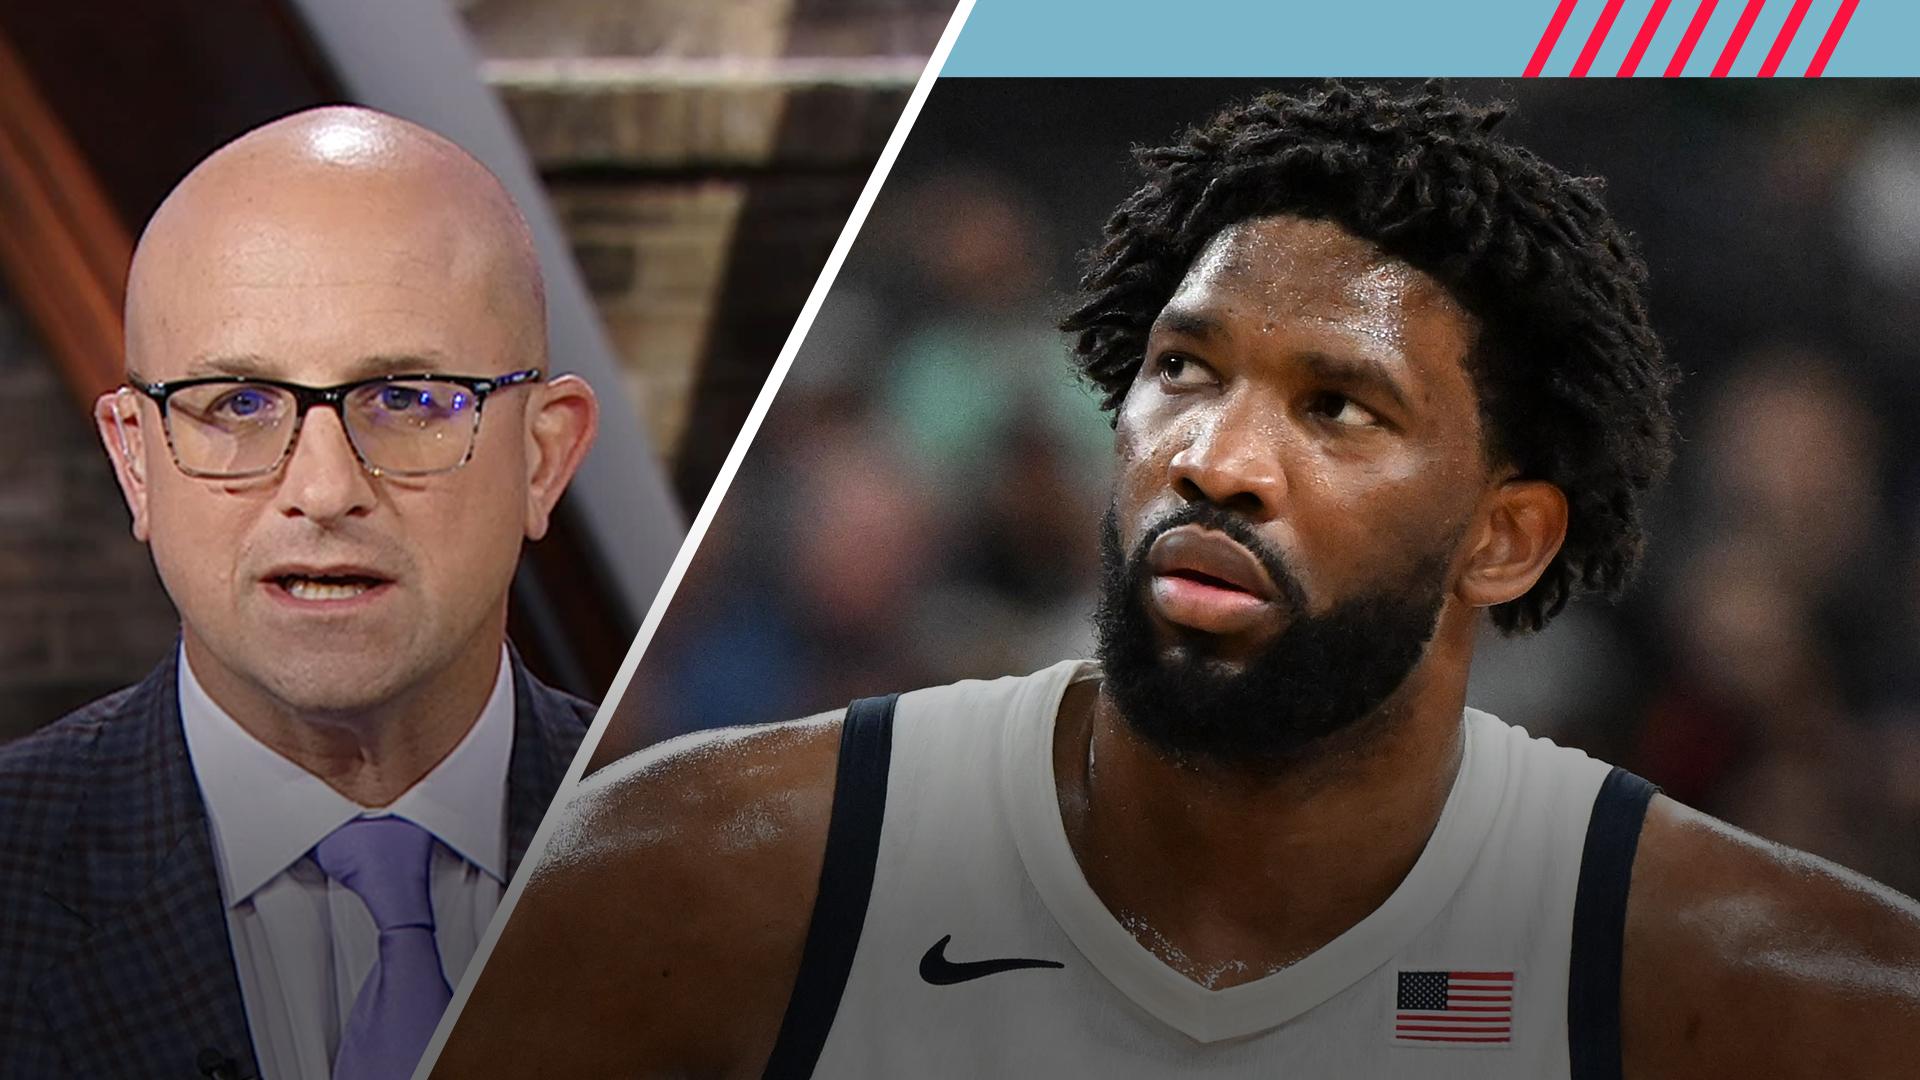 What adjustments does Joel Embiid need to make to find success on Team USA?